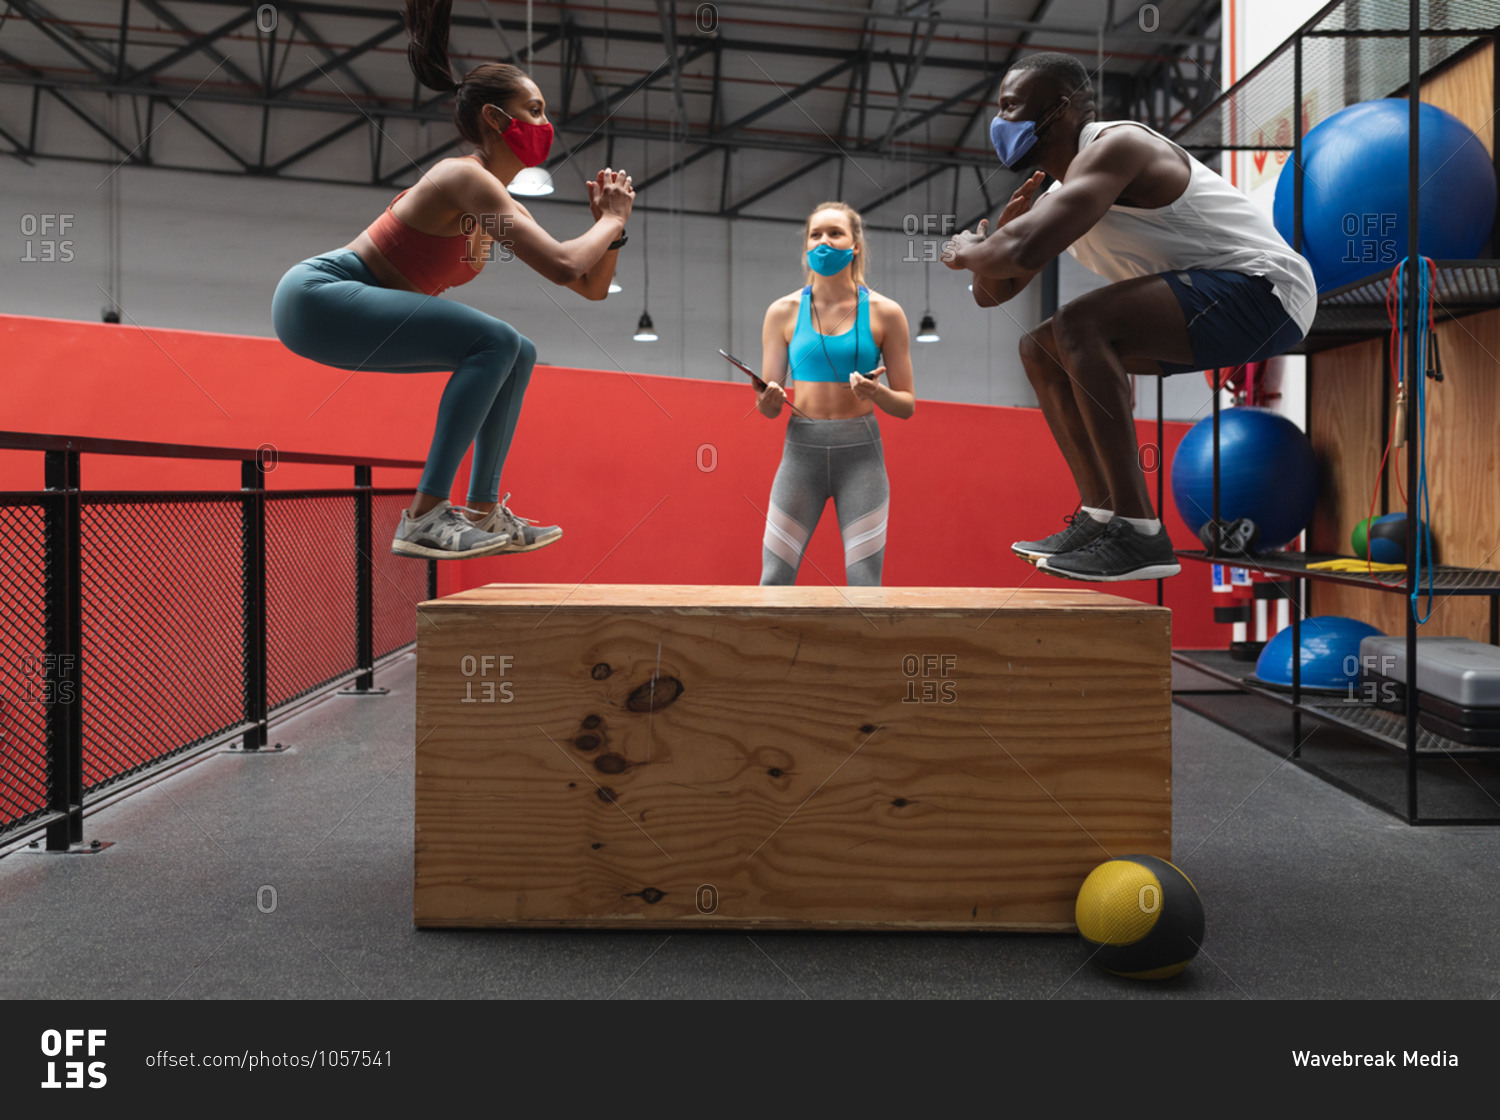 Fit African American man and Fit caucasian woman wearing face masks jumping on wooden plyo box in the gym while caucasian female fitness trainer holding stopwatch and clipboard.